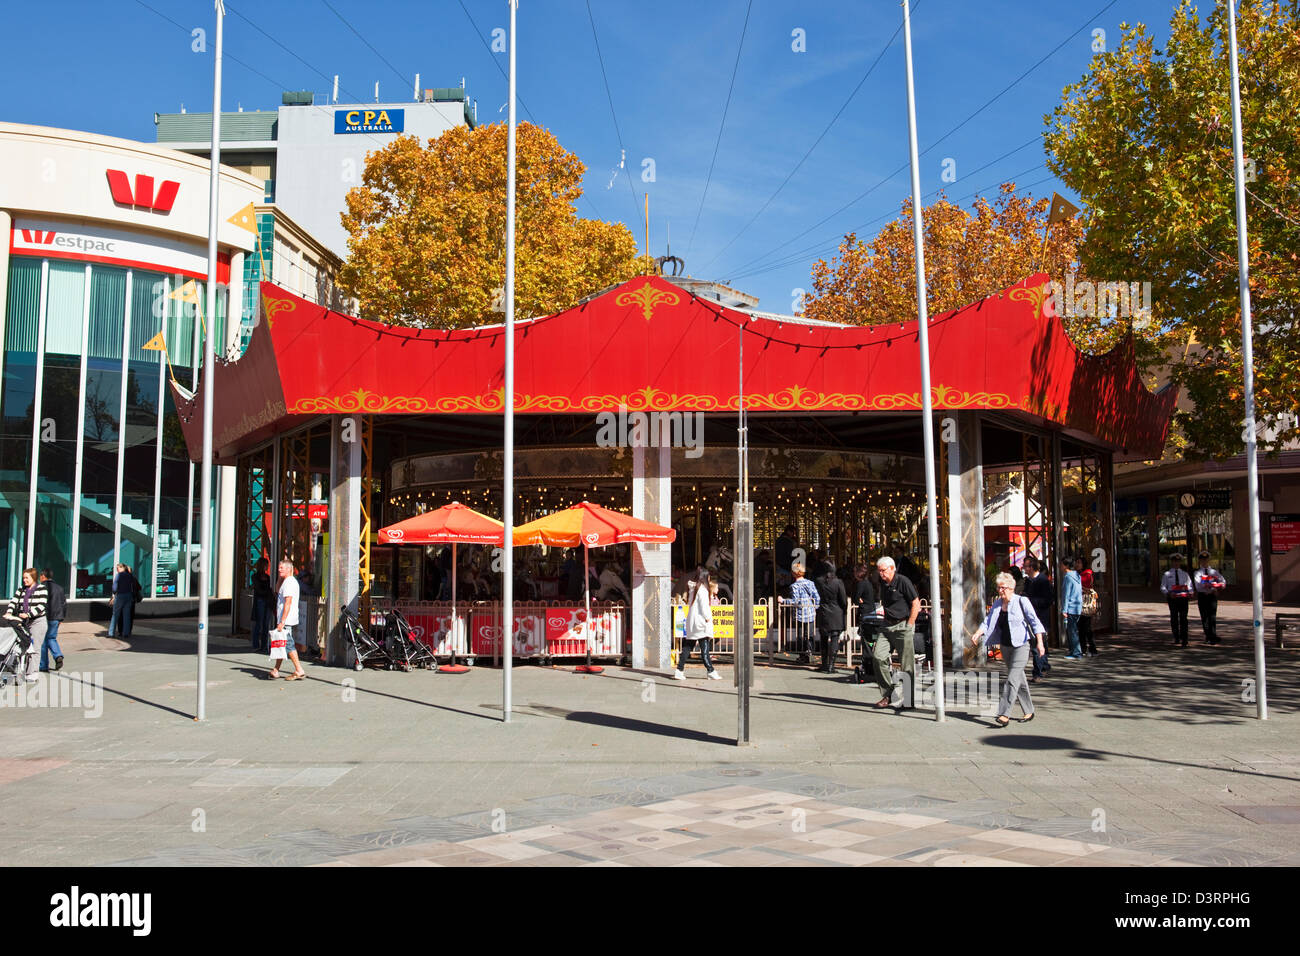 The Canberra merry-go-round in Petrie Plaza. Canberra, Australian Capital Territory (ACT), Australia Stock Photo